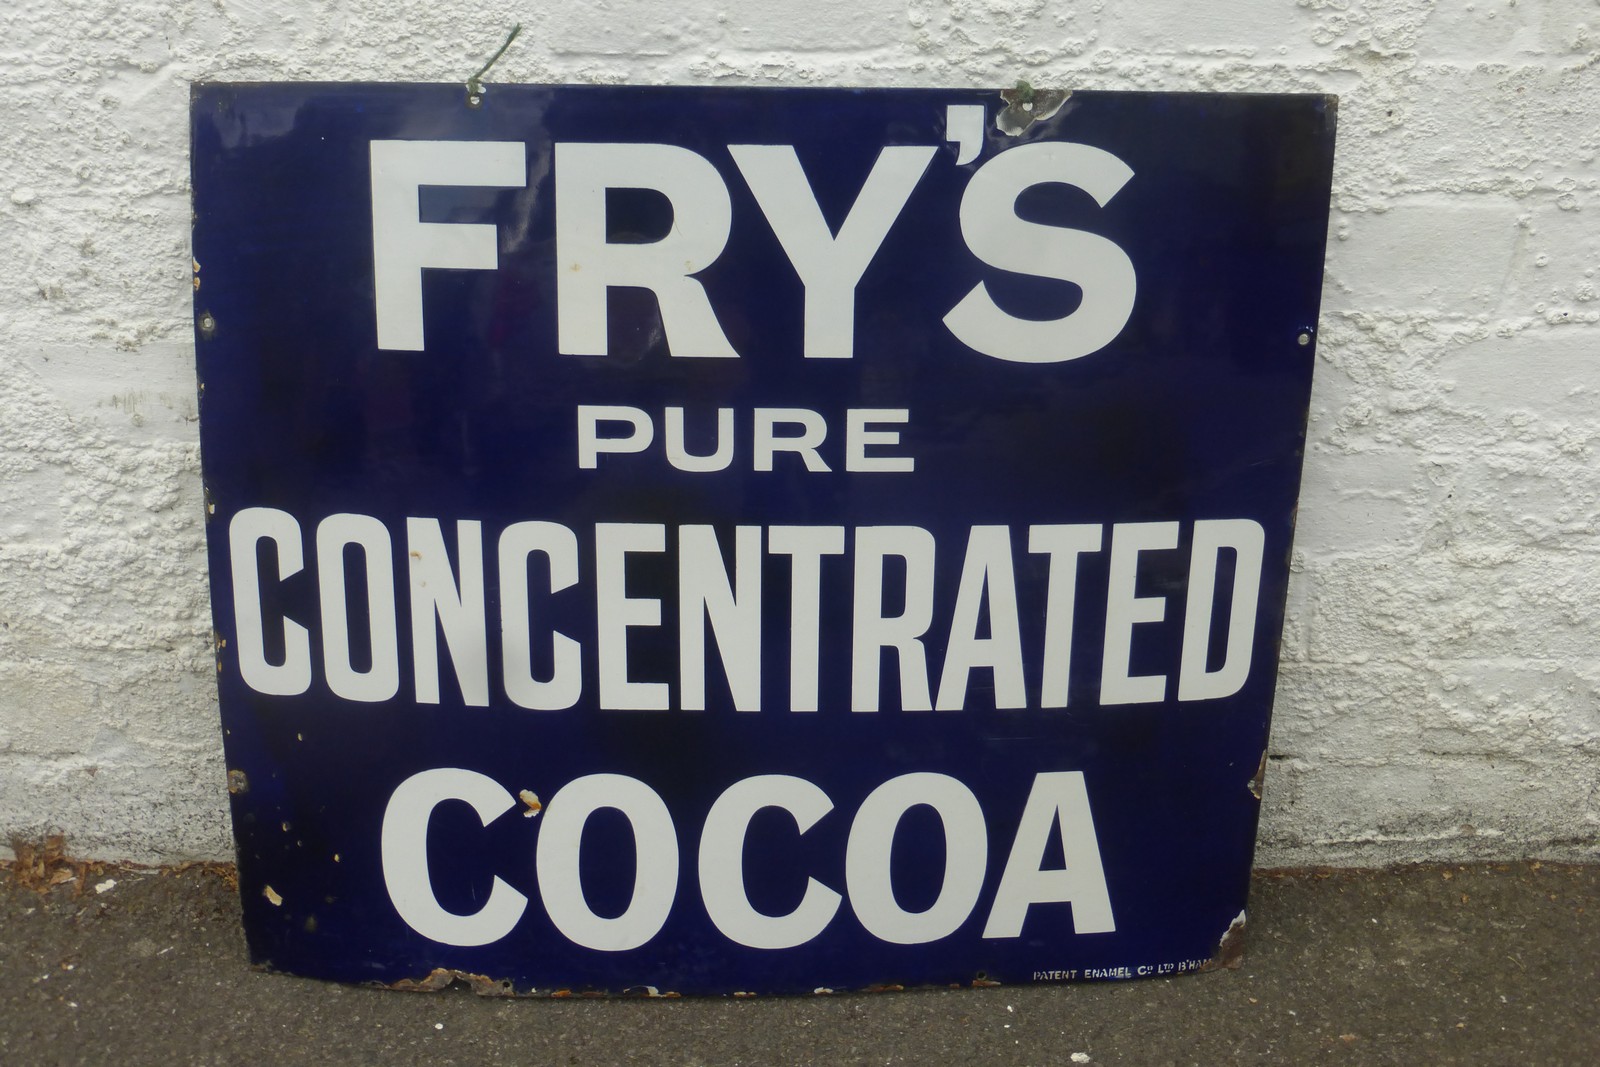 A Fry's Pure Concentrated Cocoa rectangular enamel sign by Patent Enamel, with excellent gloss, 28 x